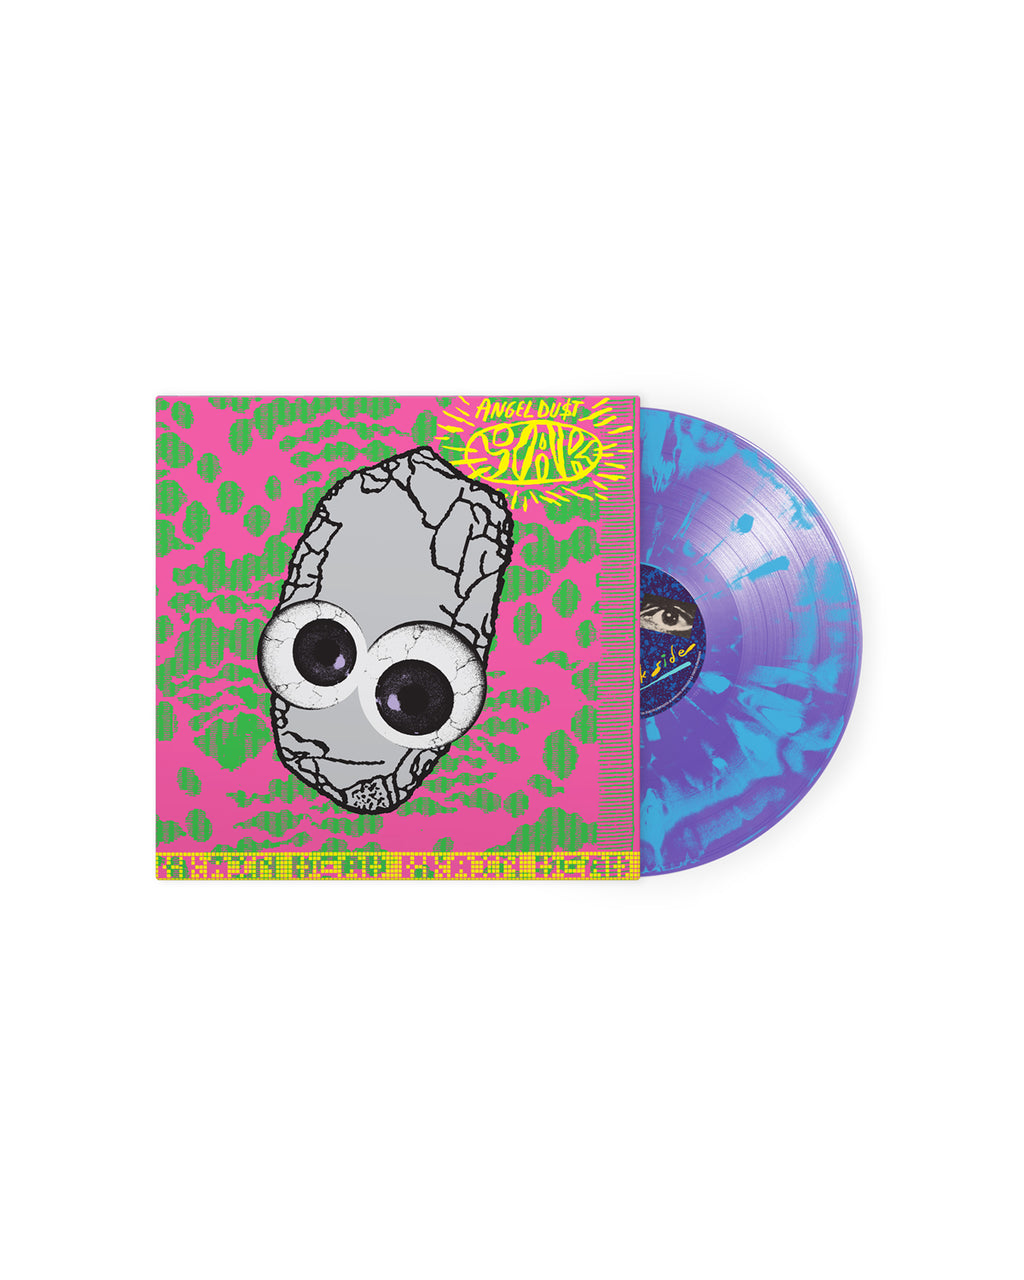 Angel Du$t "Yak: A Collection of Truck Songs" Limited Edition Vinyl Record  - Pink